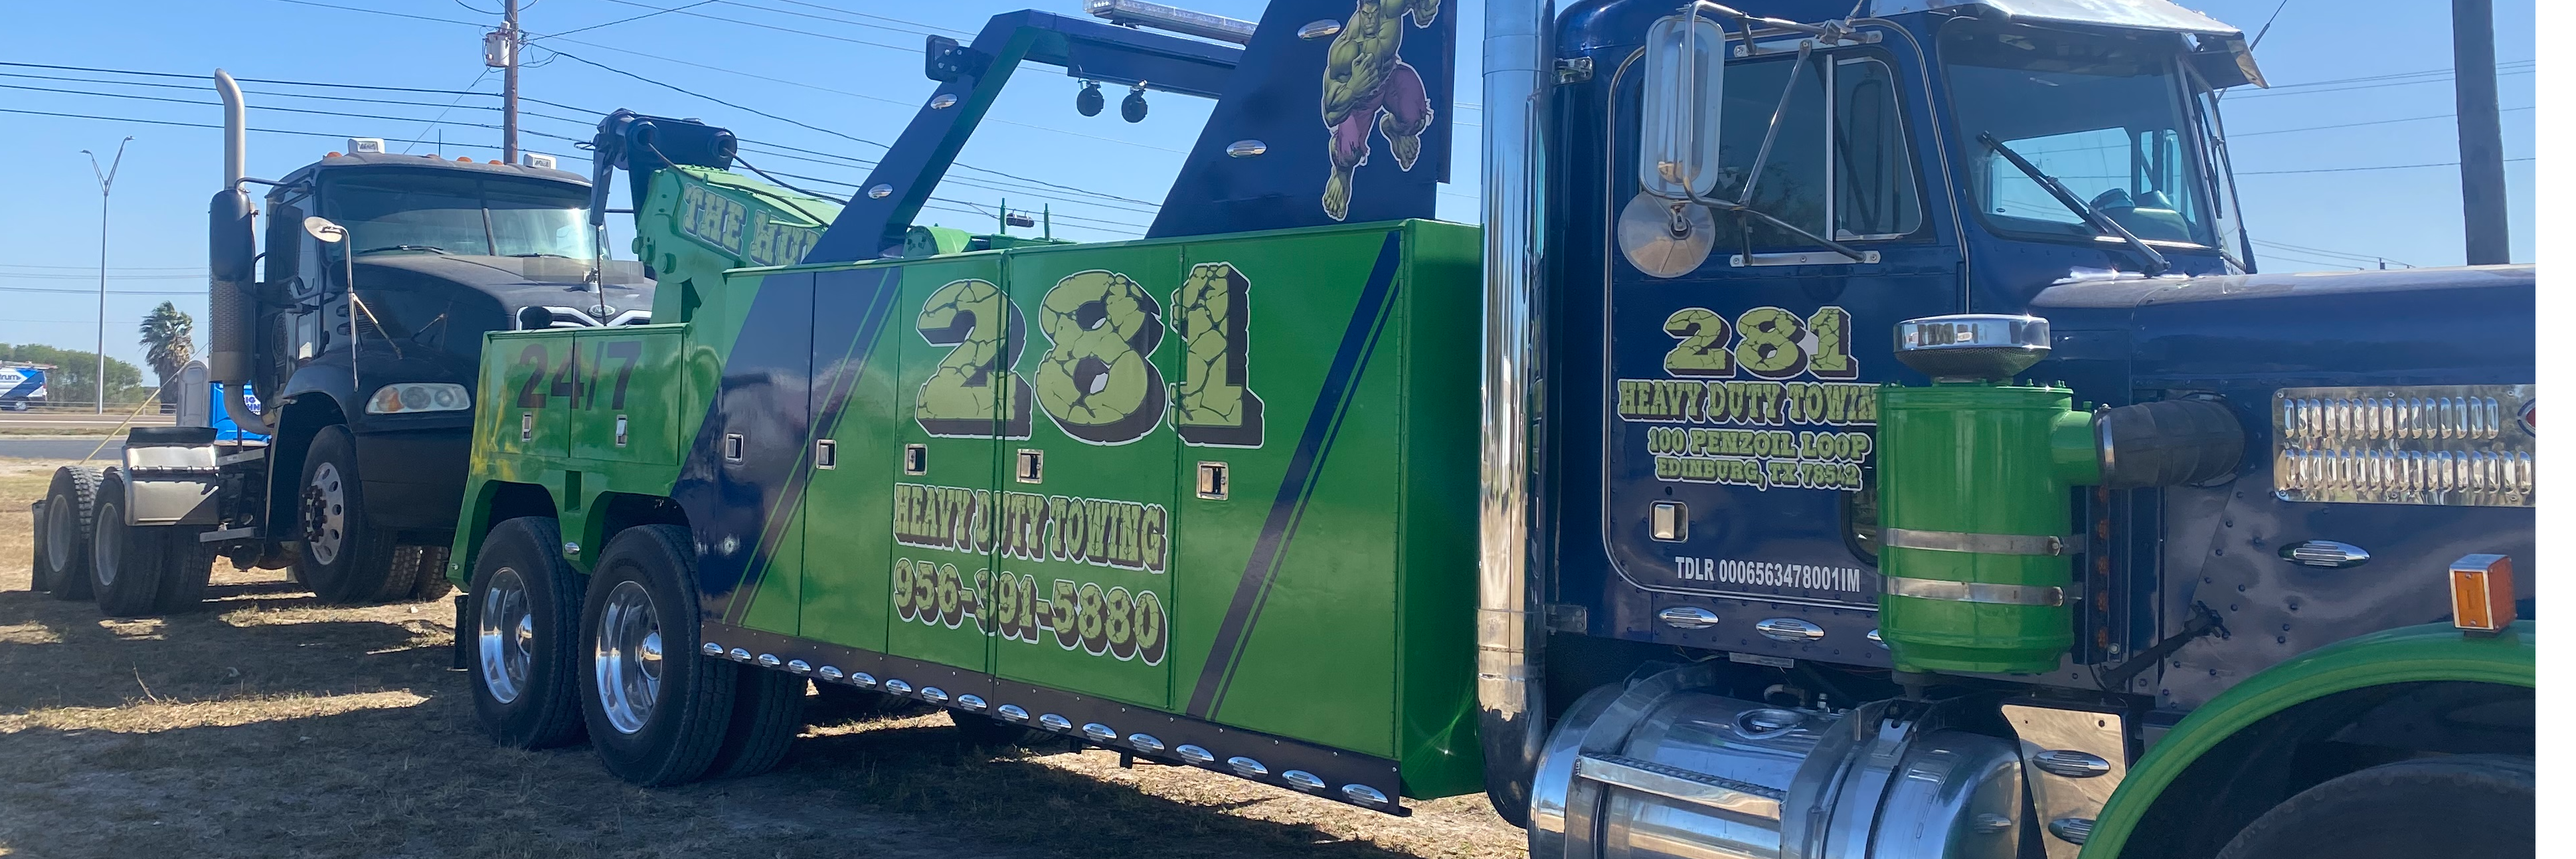 281 Heavy Duty Towing Towing.com Profile Banner